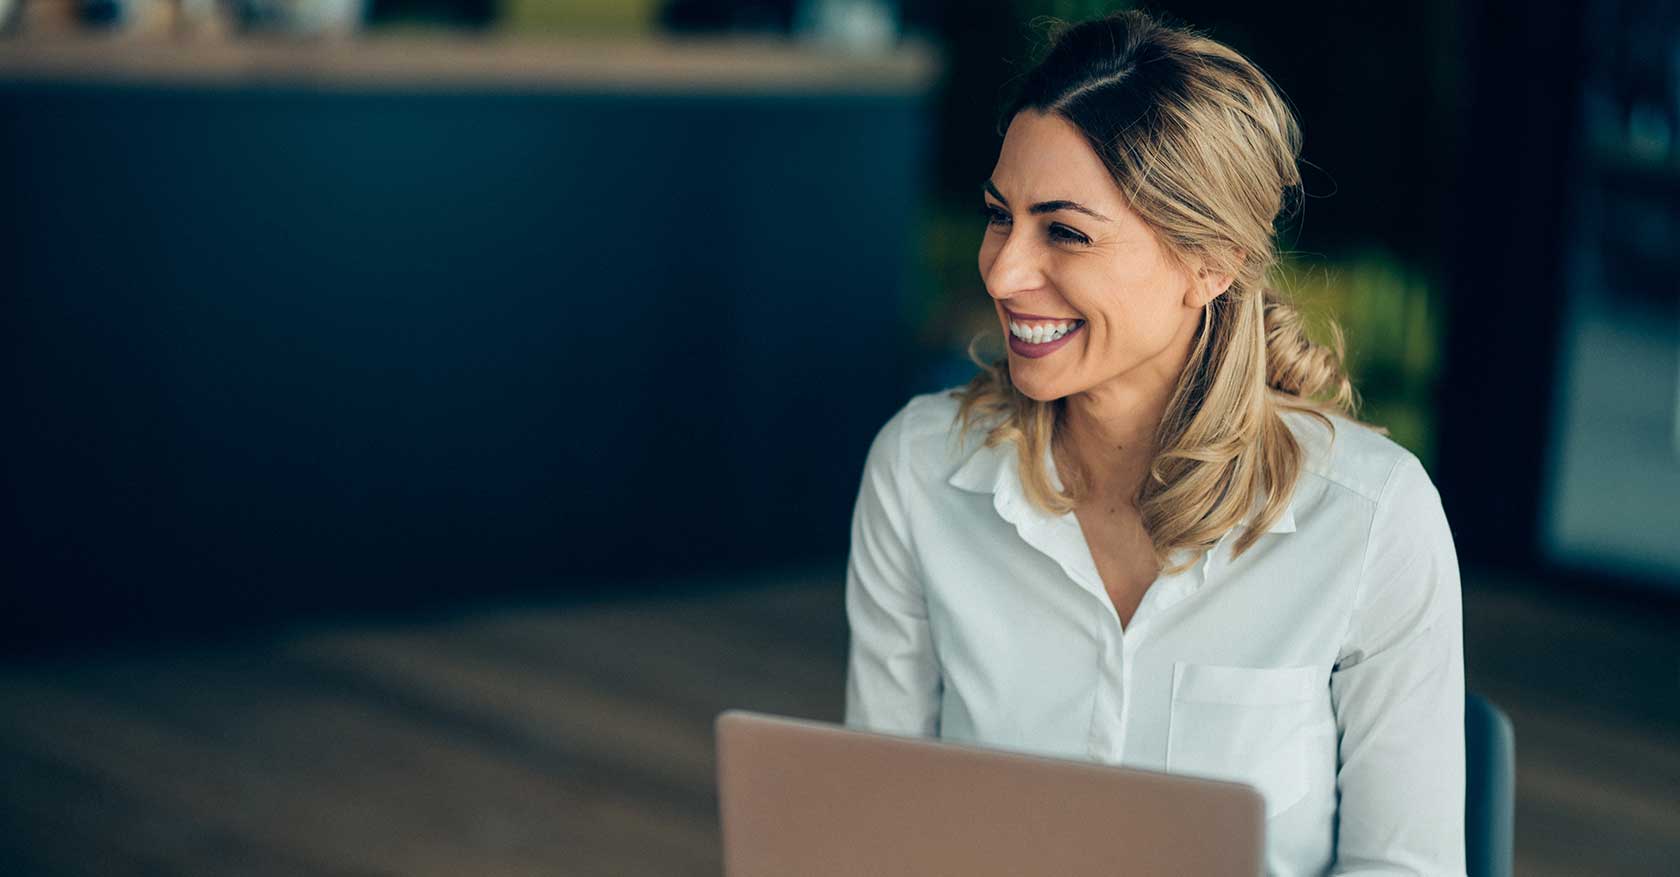 Photo of a woman smiling in front of her laptop